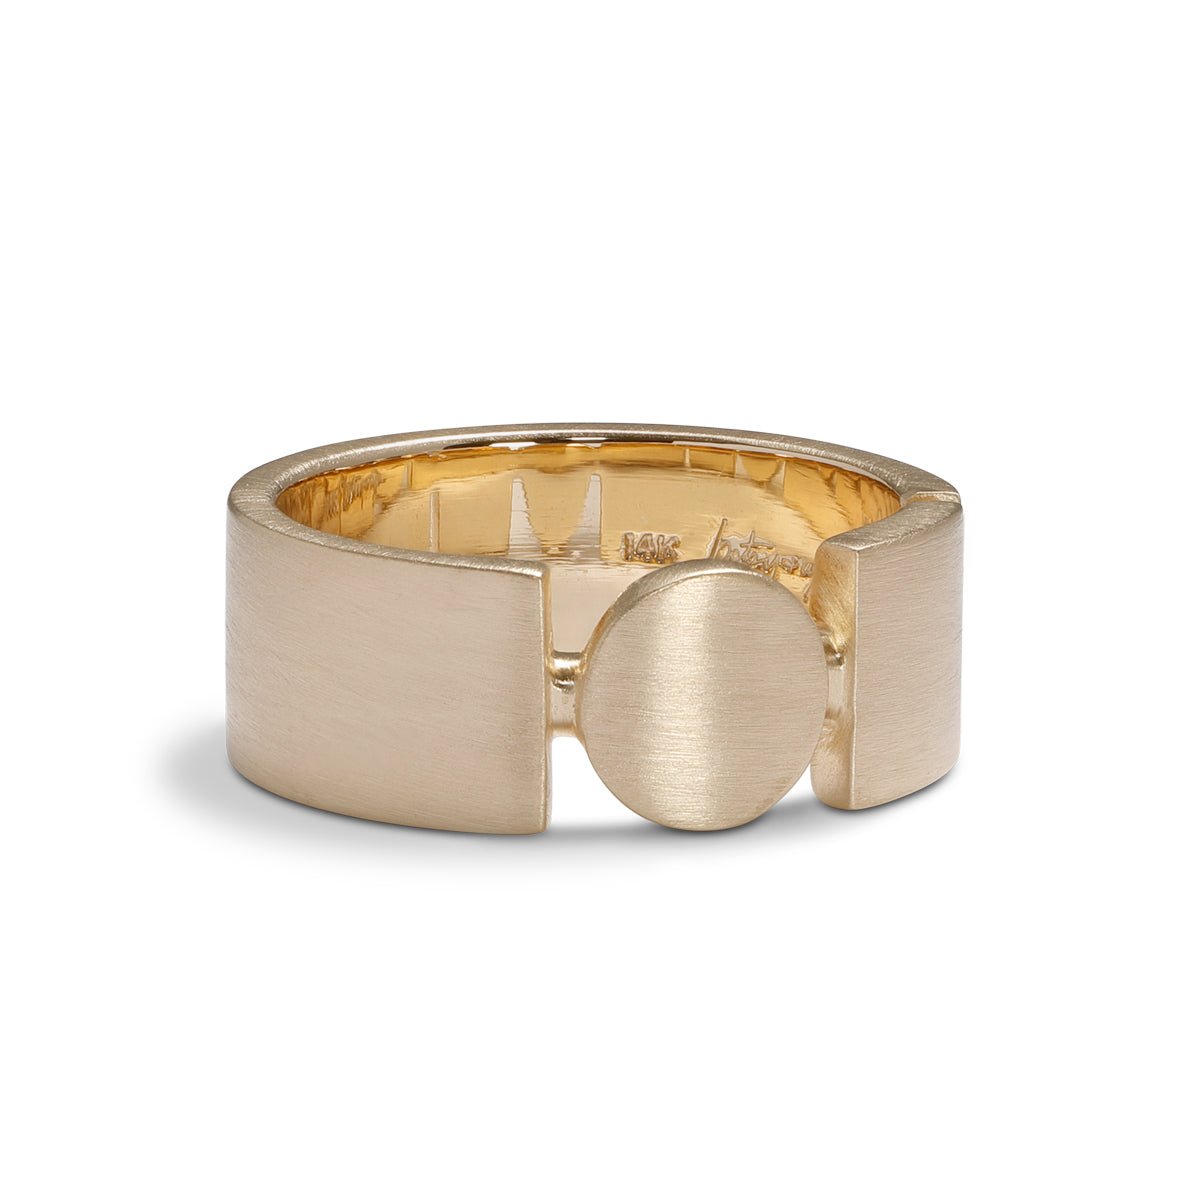 Square and circle motif Forma band. Made with 14K recycled gold in Portland, Oregon.